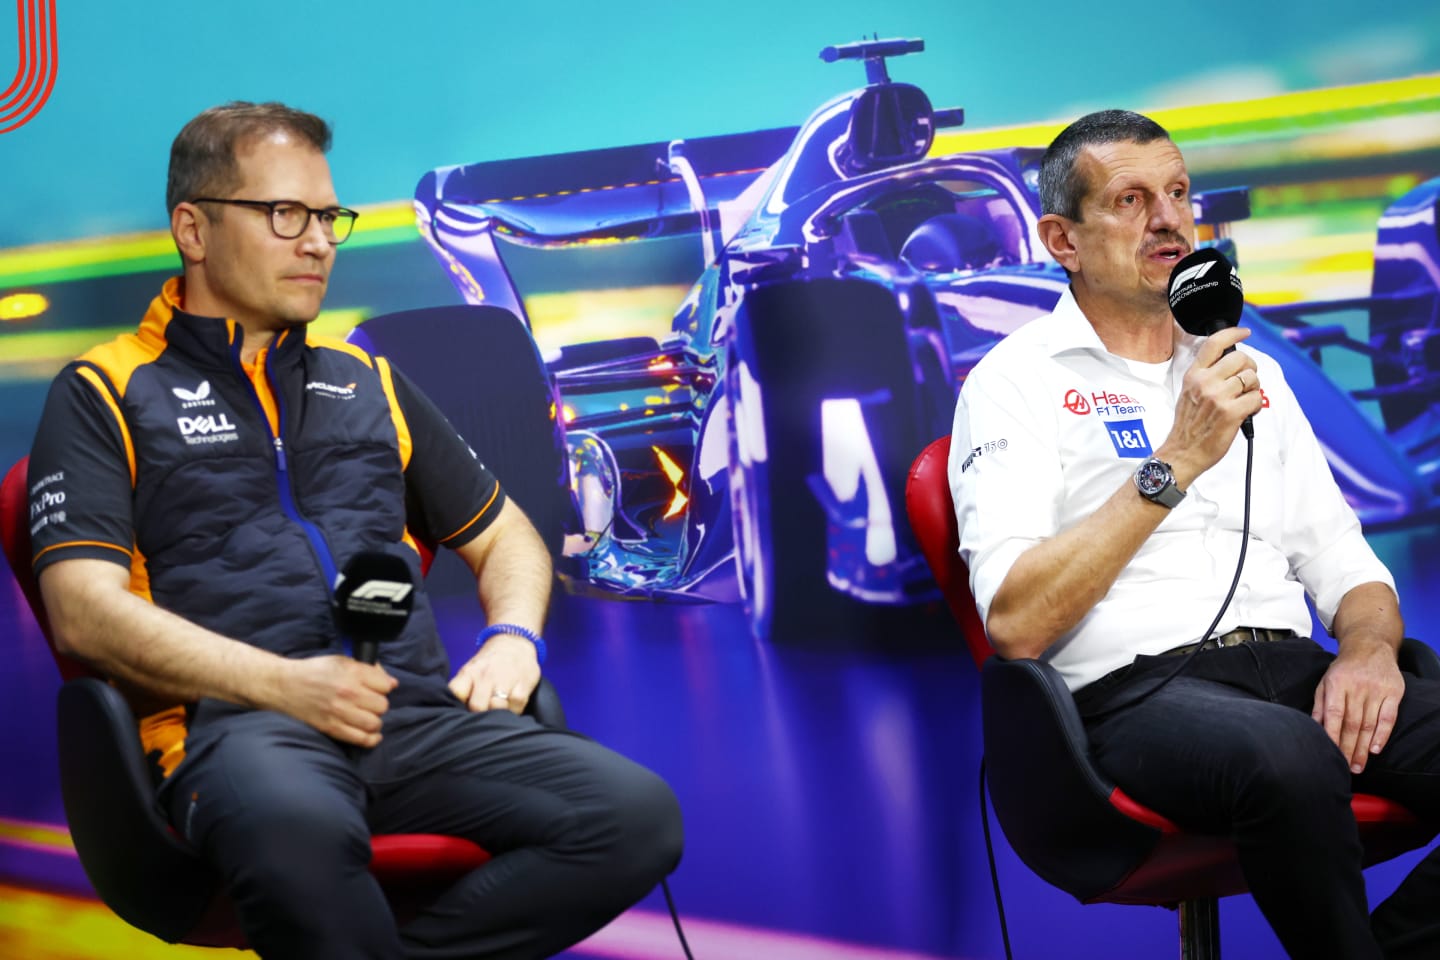 SAO PAULO, BRAZIL - NOVEMBER 12: McLaren Team Principal Andreas Seidl and Haas F1 Team Principal Guenther Steiner attend a press conference prior to practice ahead of the F1 Grand Prix of Brazil at Autodromo Jose Carlos Pace on November 12, 2022 in Sao Paulo, Brazil. (Photo by Bryn Lennon/Getty Images)